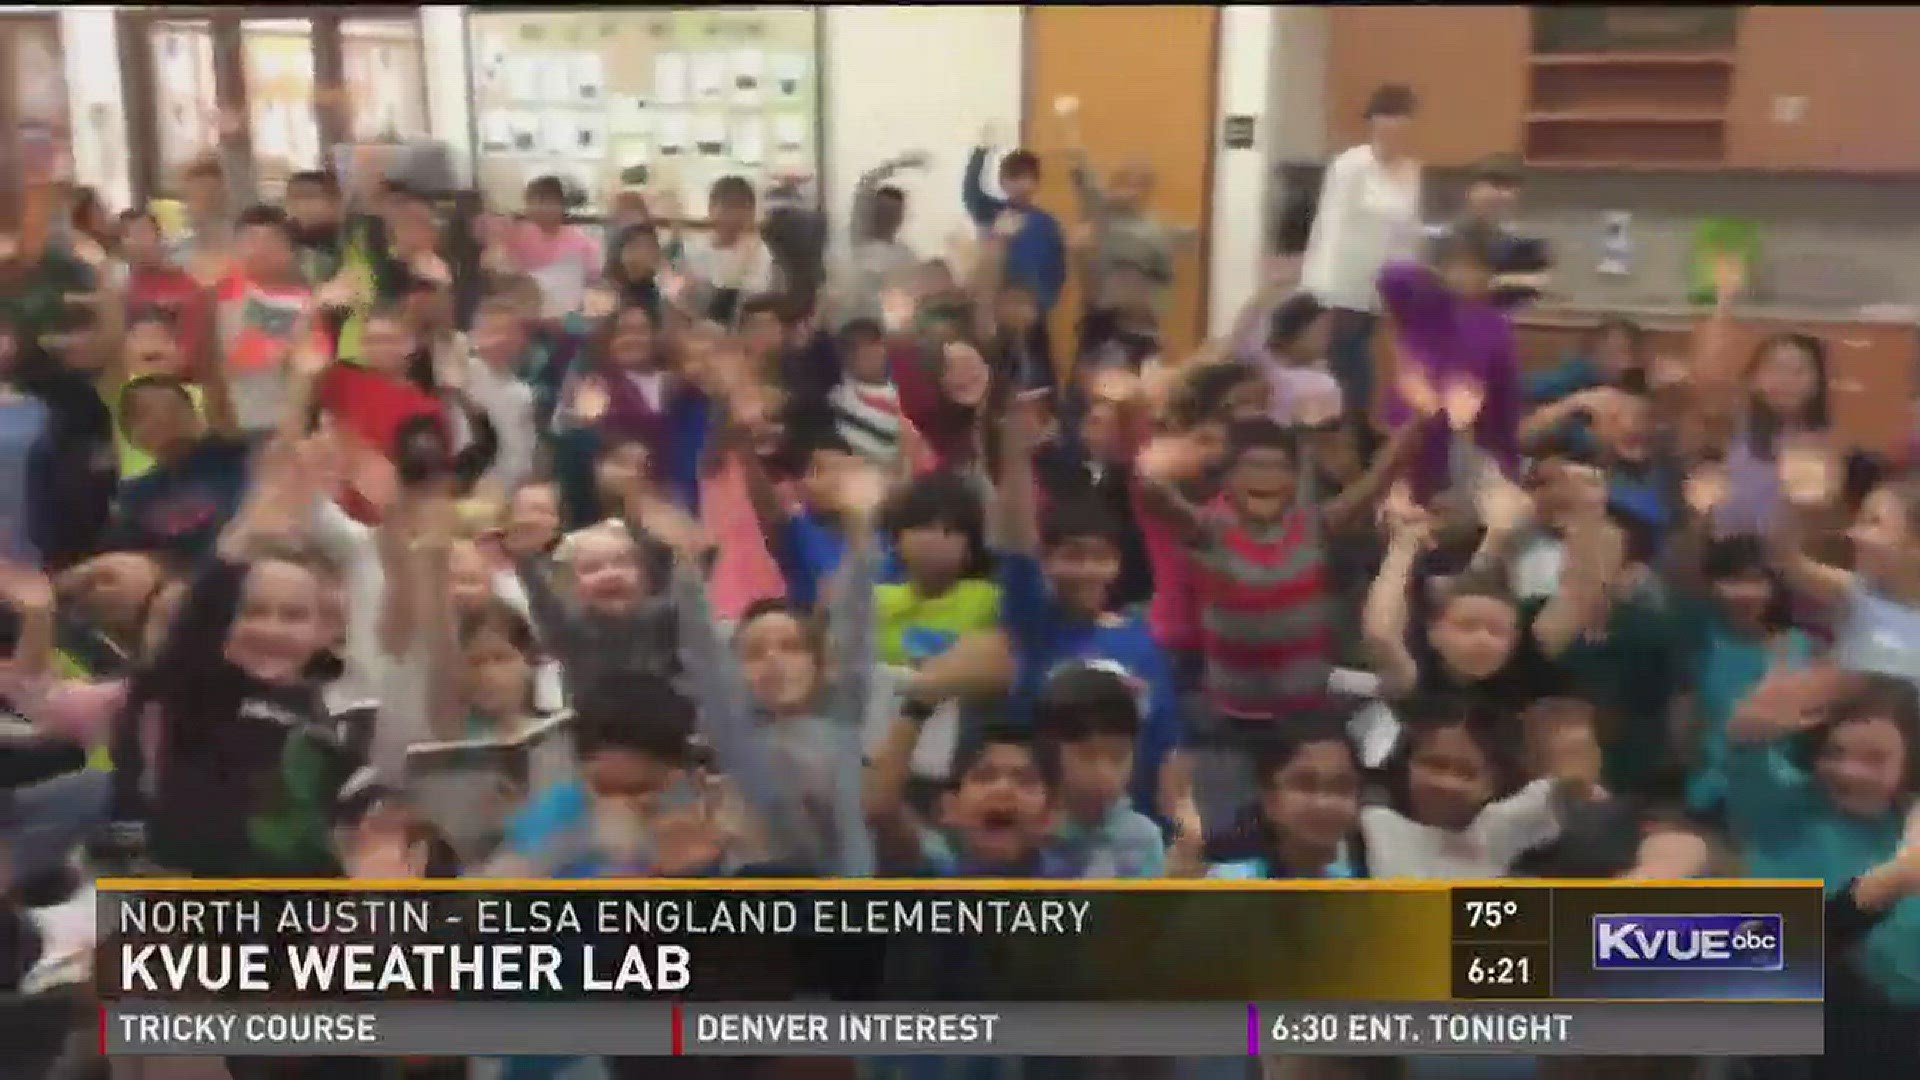 Storm Team Meteorologist Nathan Gogo visited students at Elsa England Elementary on Tuesday.